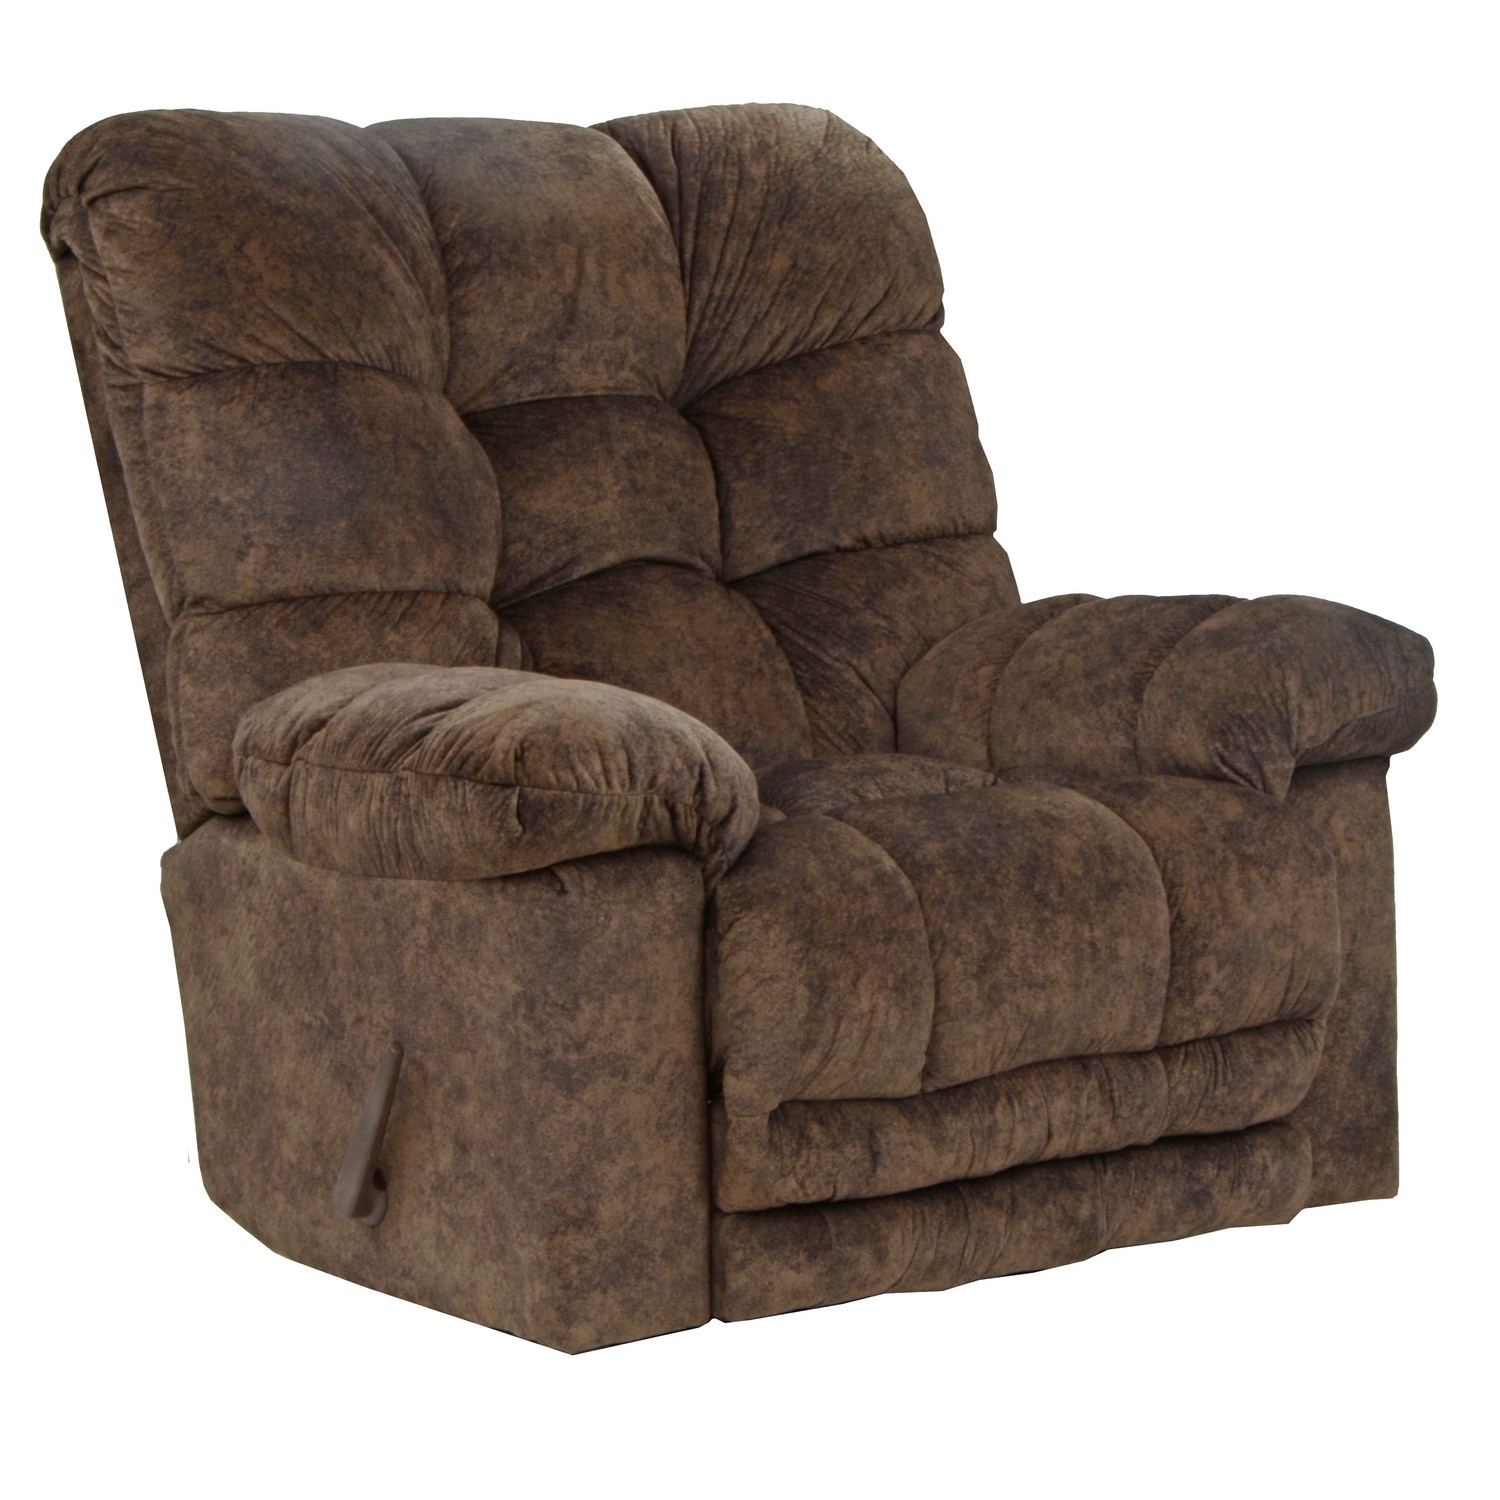 Oversized chair recliner